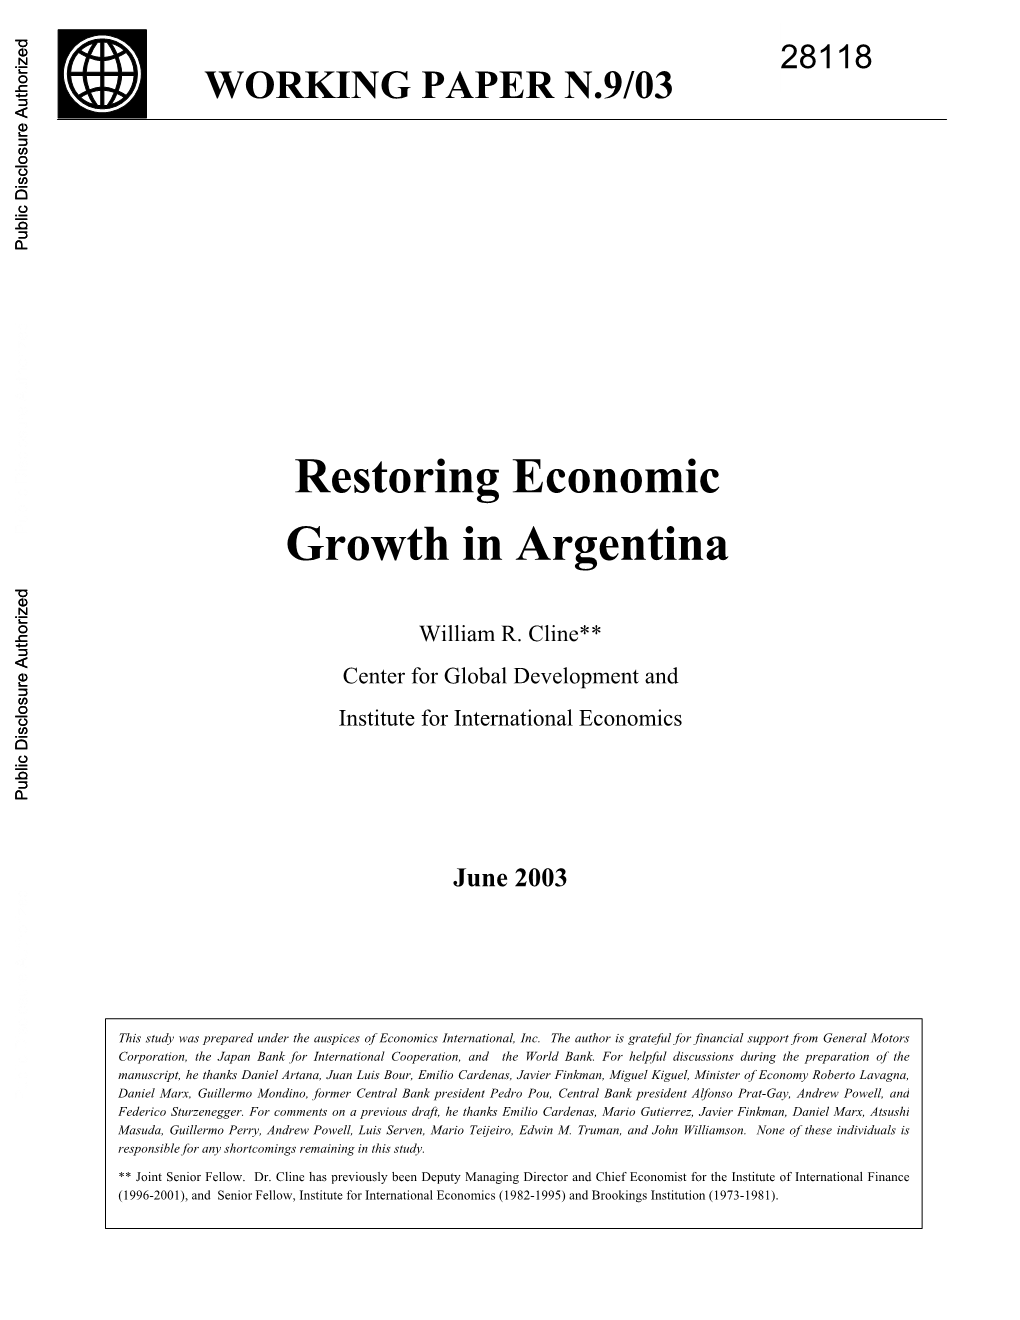 B. Fiscal Imbalance and Debt Sustainability